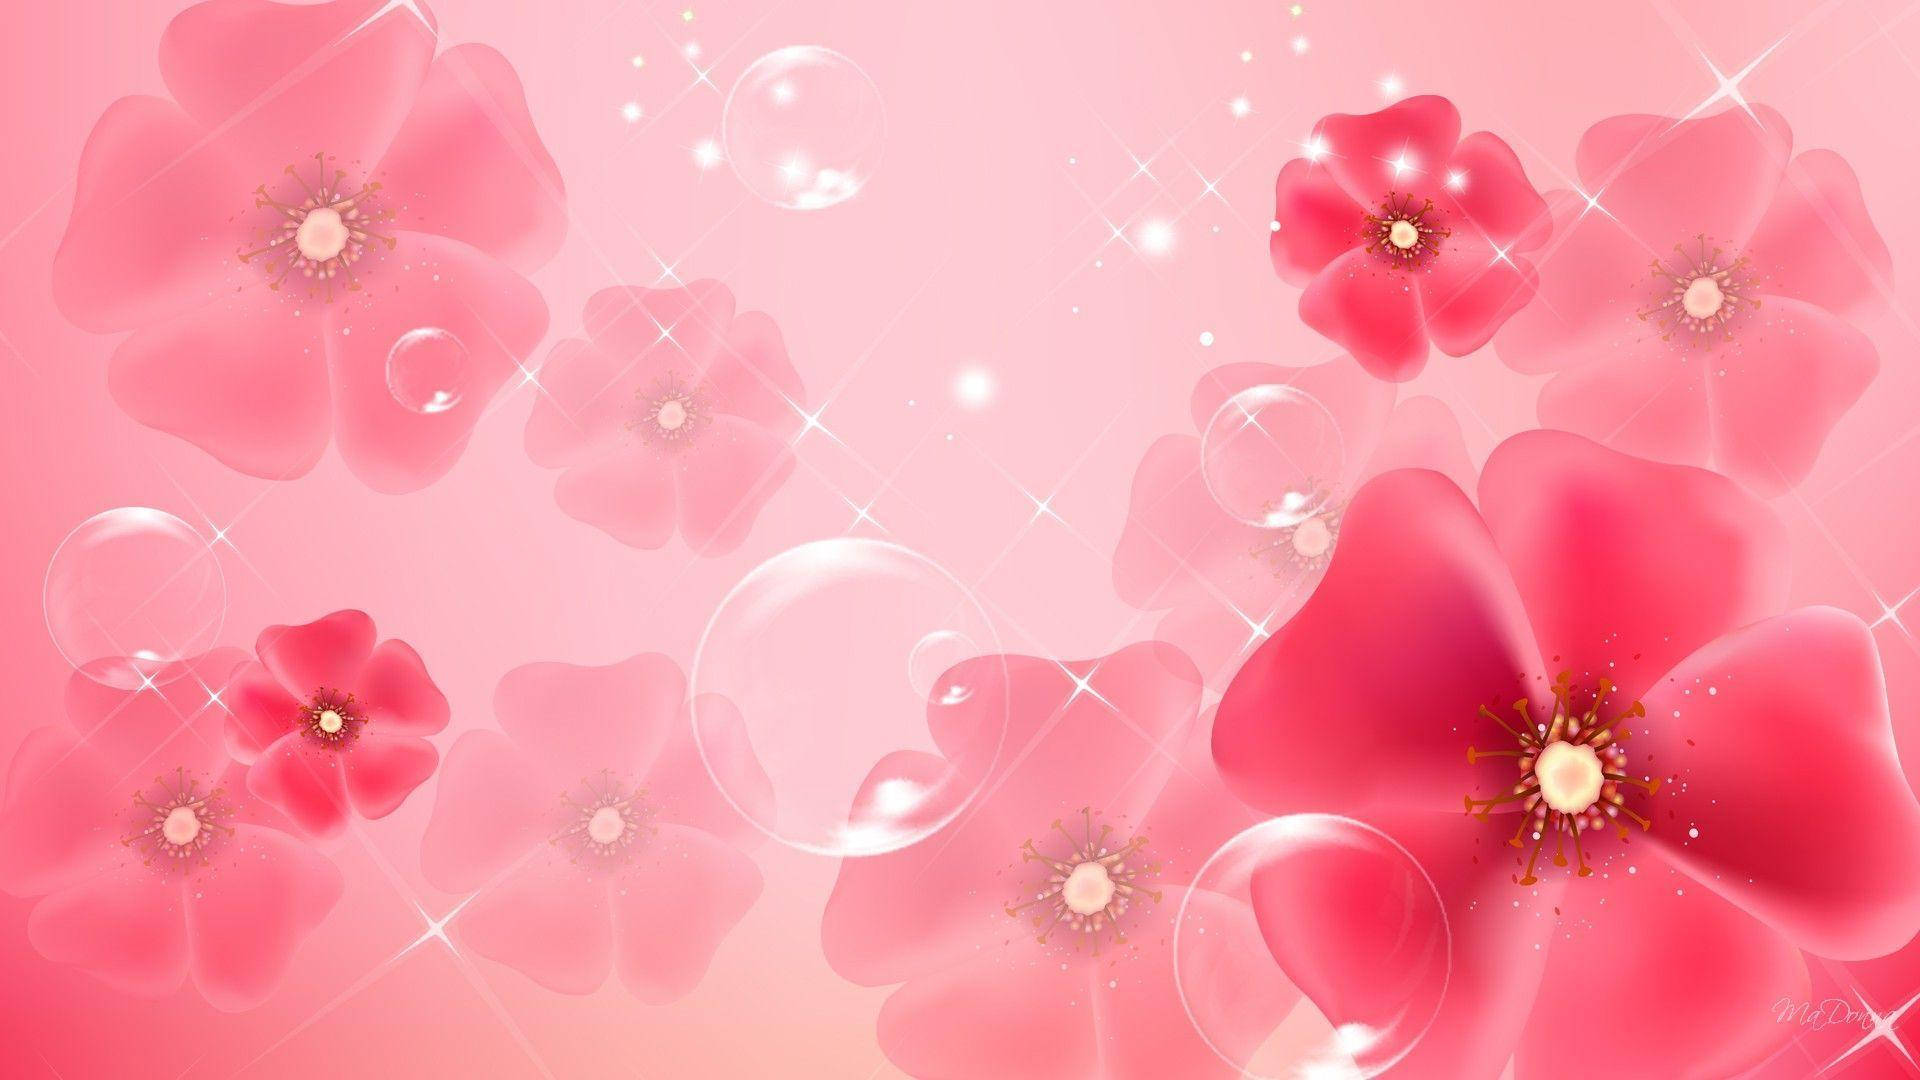 Light Pink Flowers And Bubbles